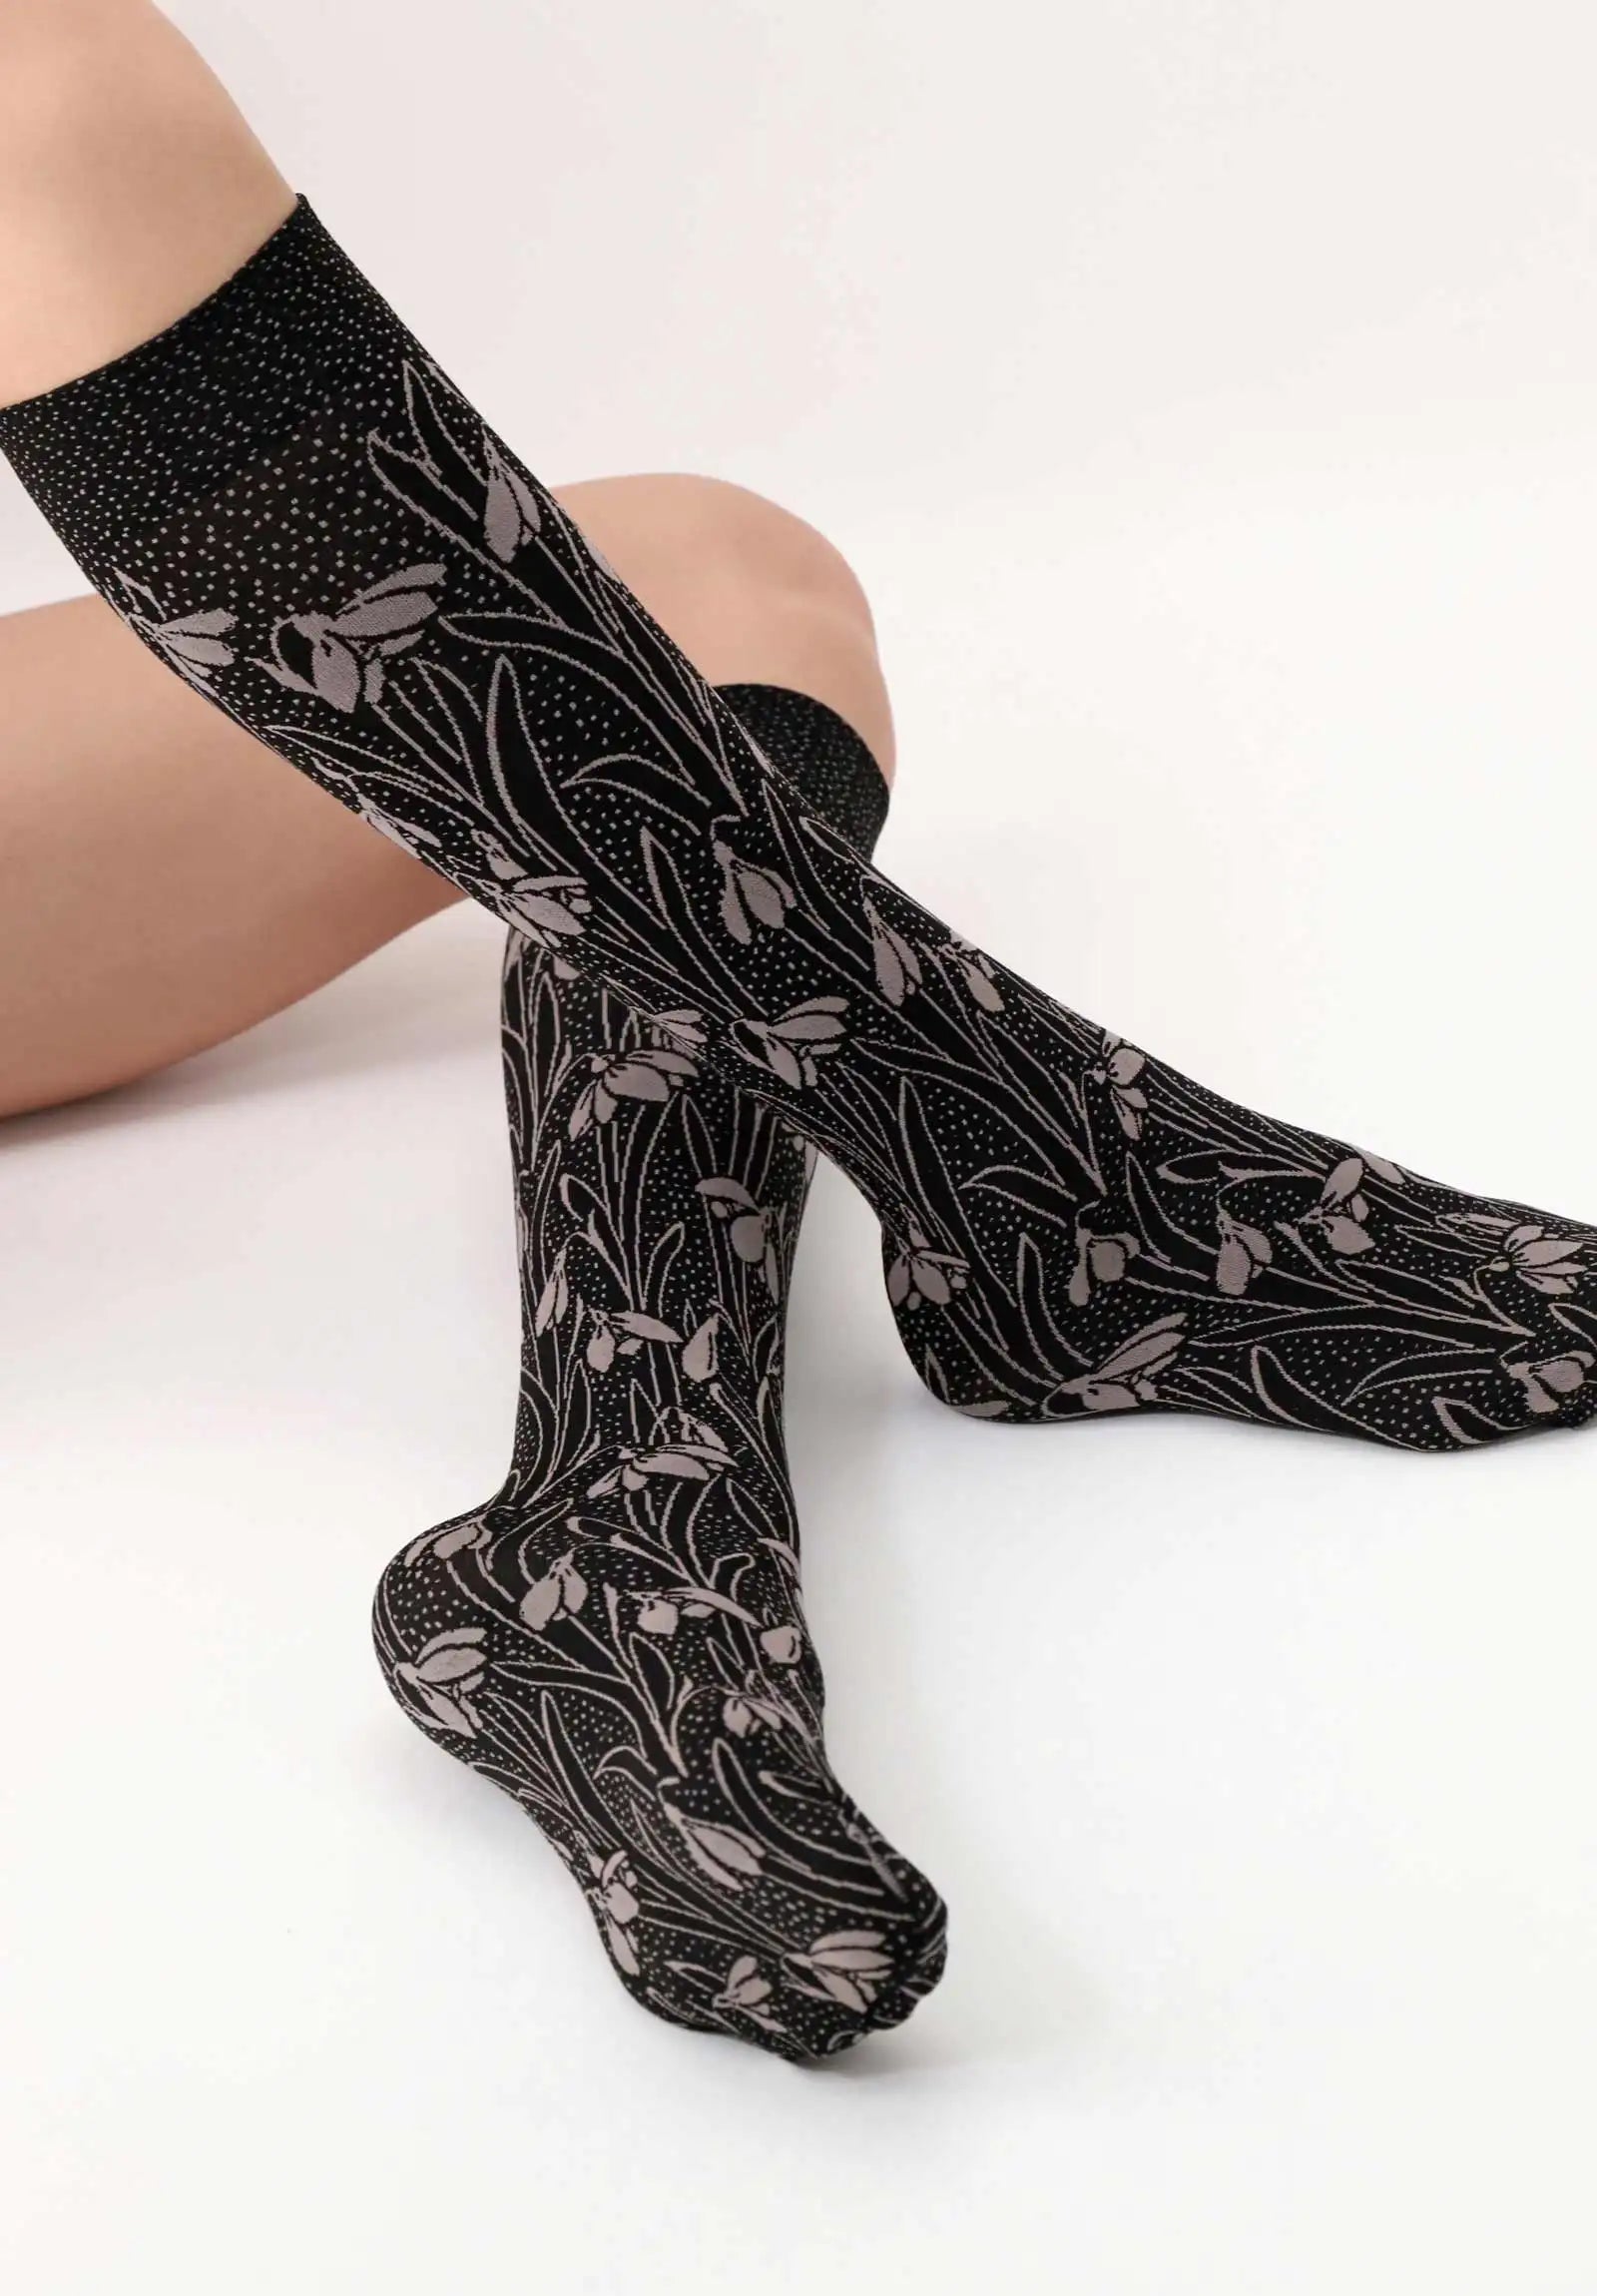 Oroblù I Love First Class Flowers Gambaletto - Black opaque fashion knee-high socks with a beige snowdrop style floral pattern with speckled background.